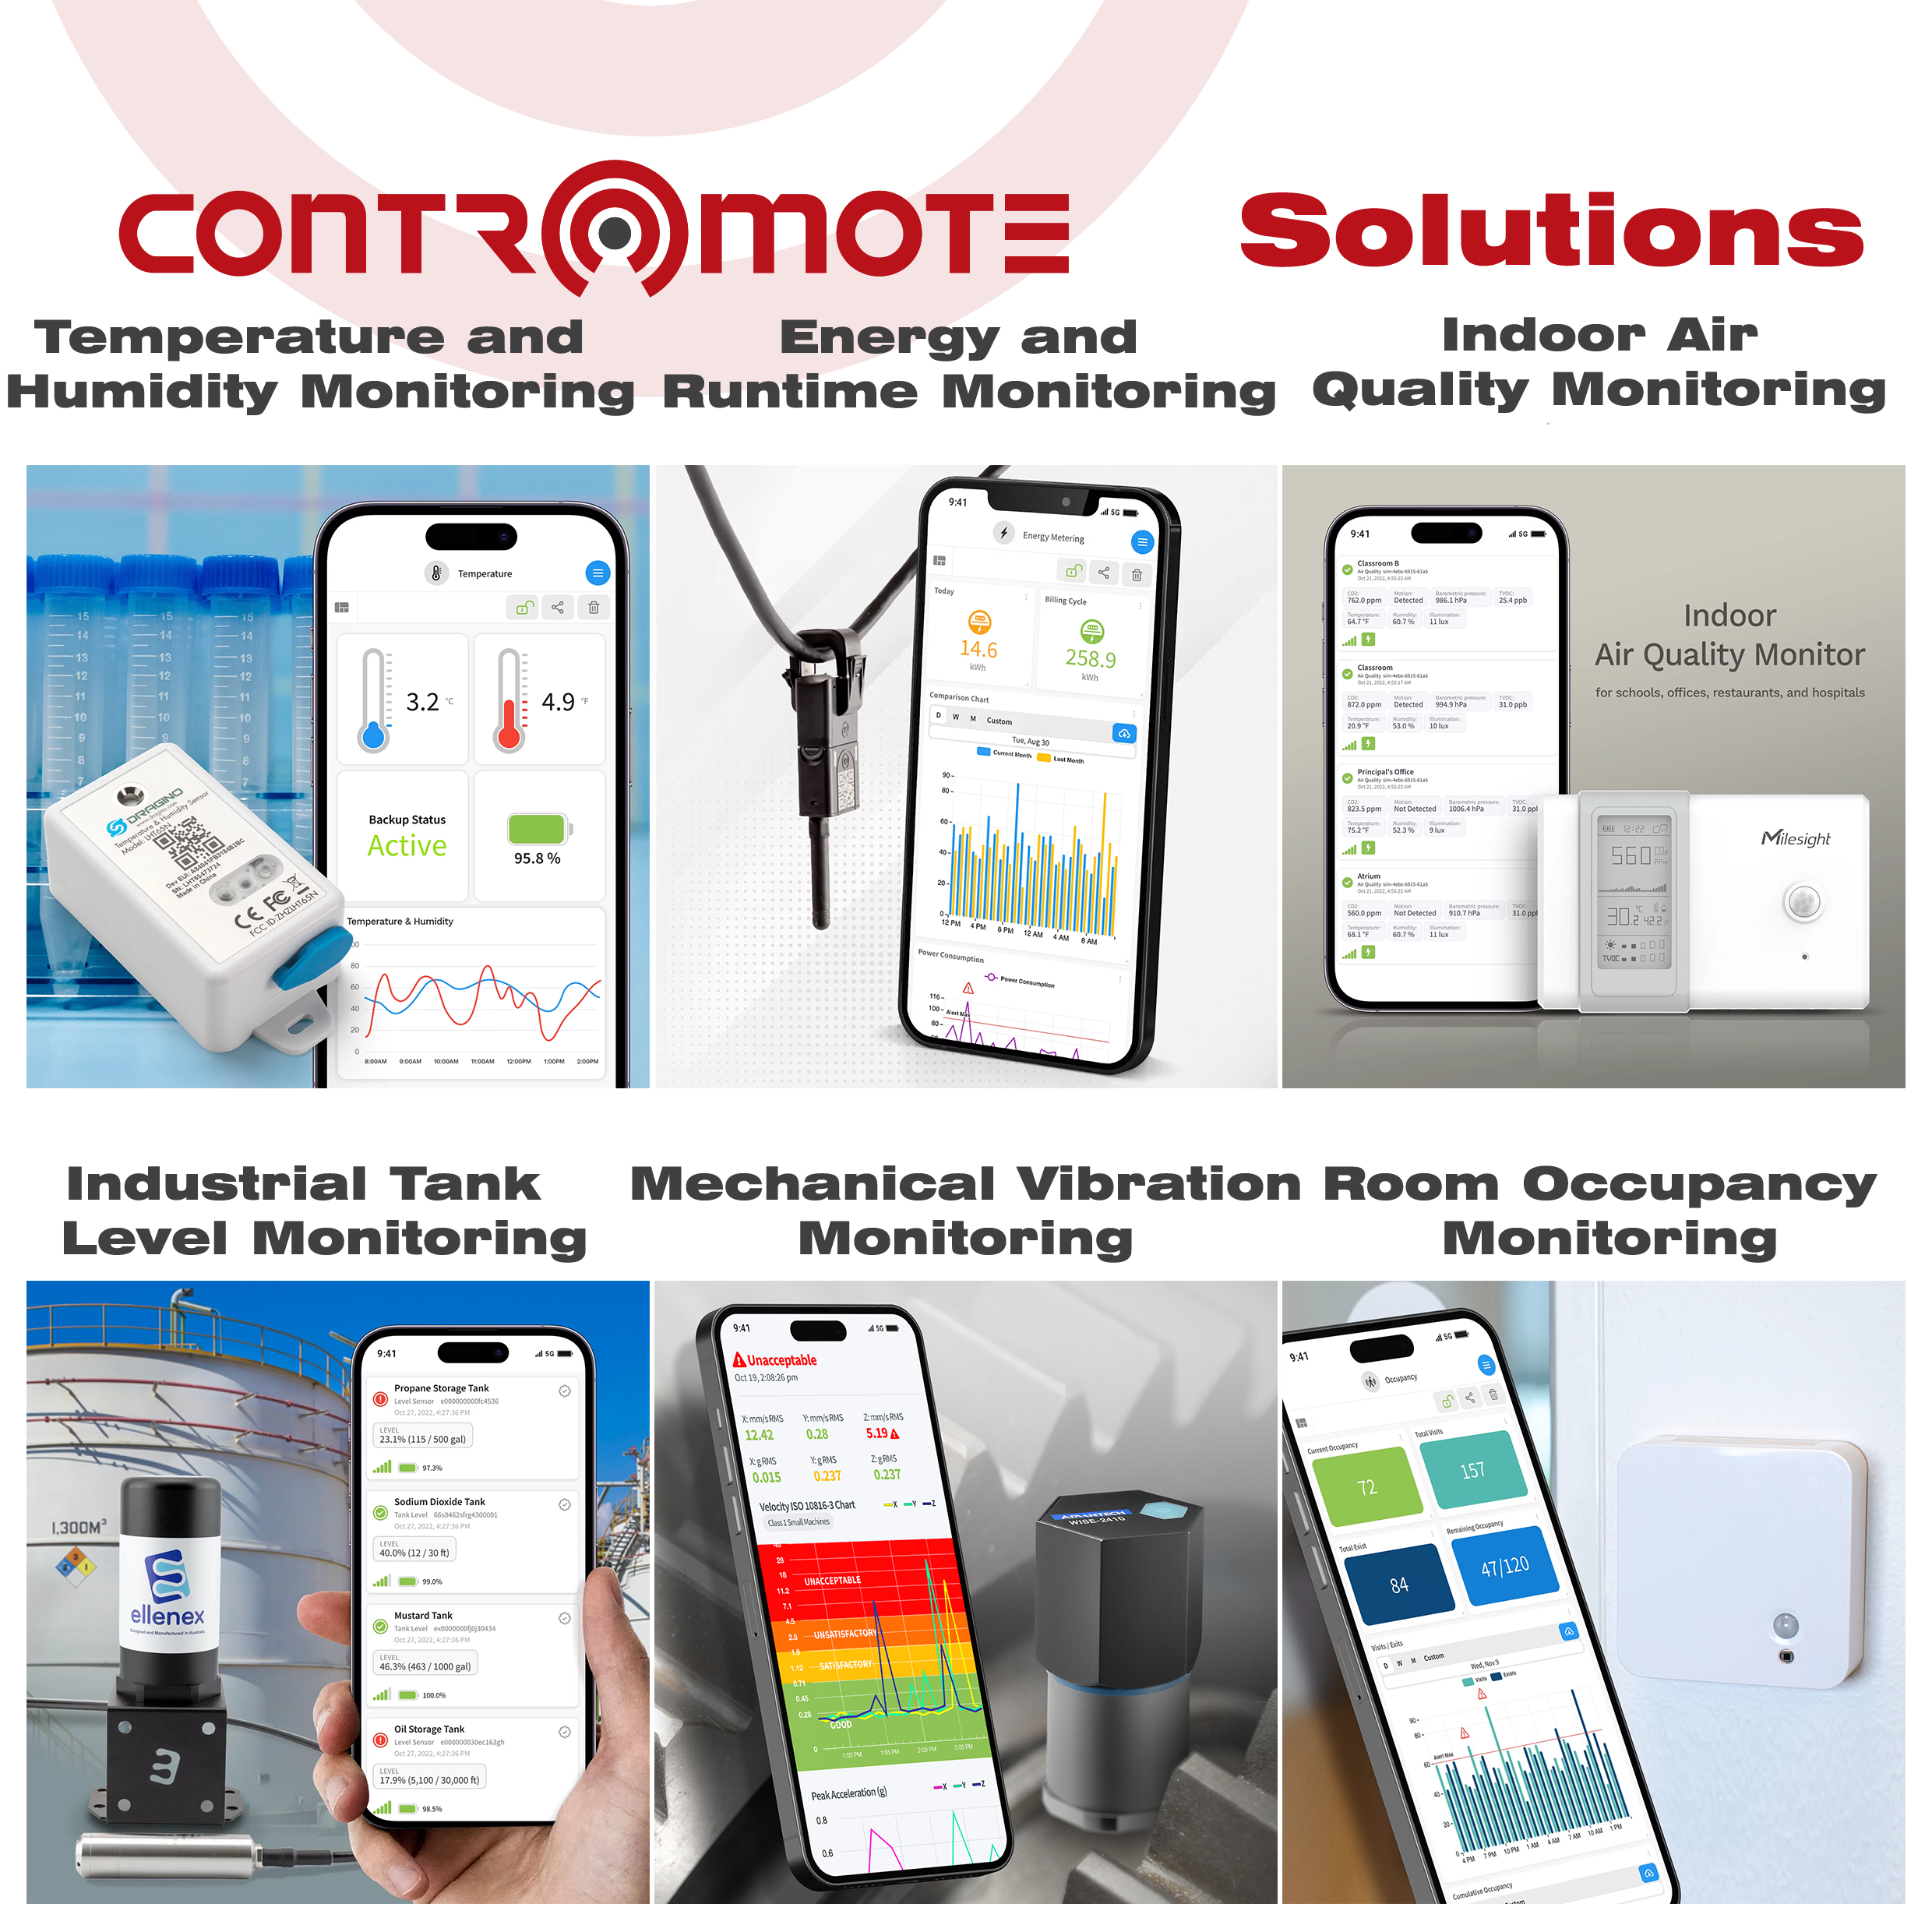 IOT Sensors for monitoring Temperature, Humidity, Air Quality, Room Occupancy, Mechanical Vibration, Tank Level and Energy